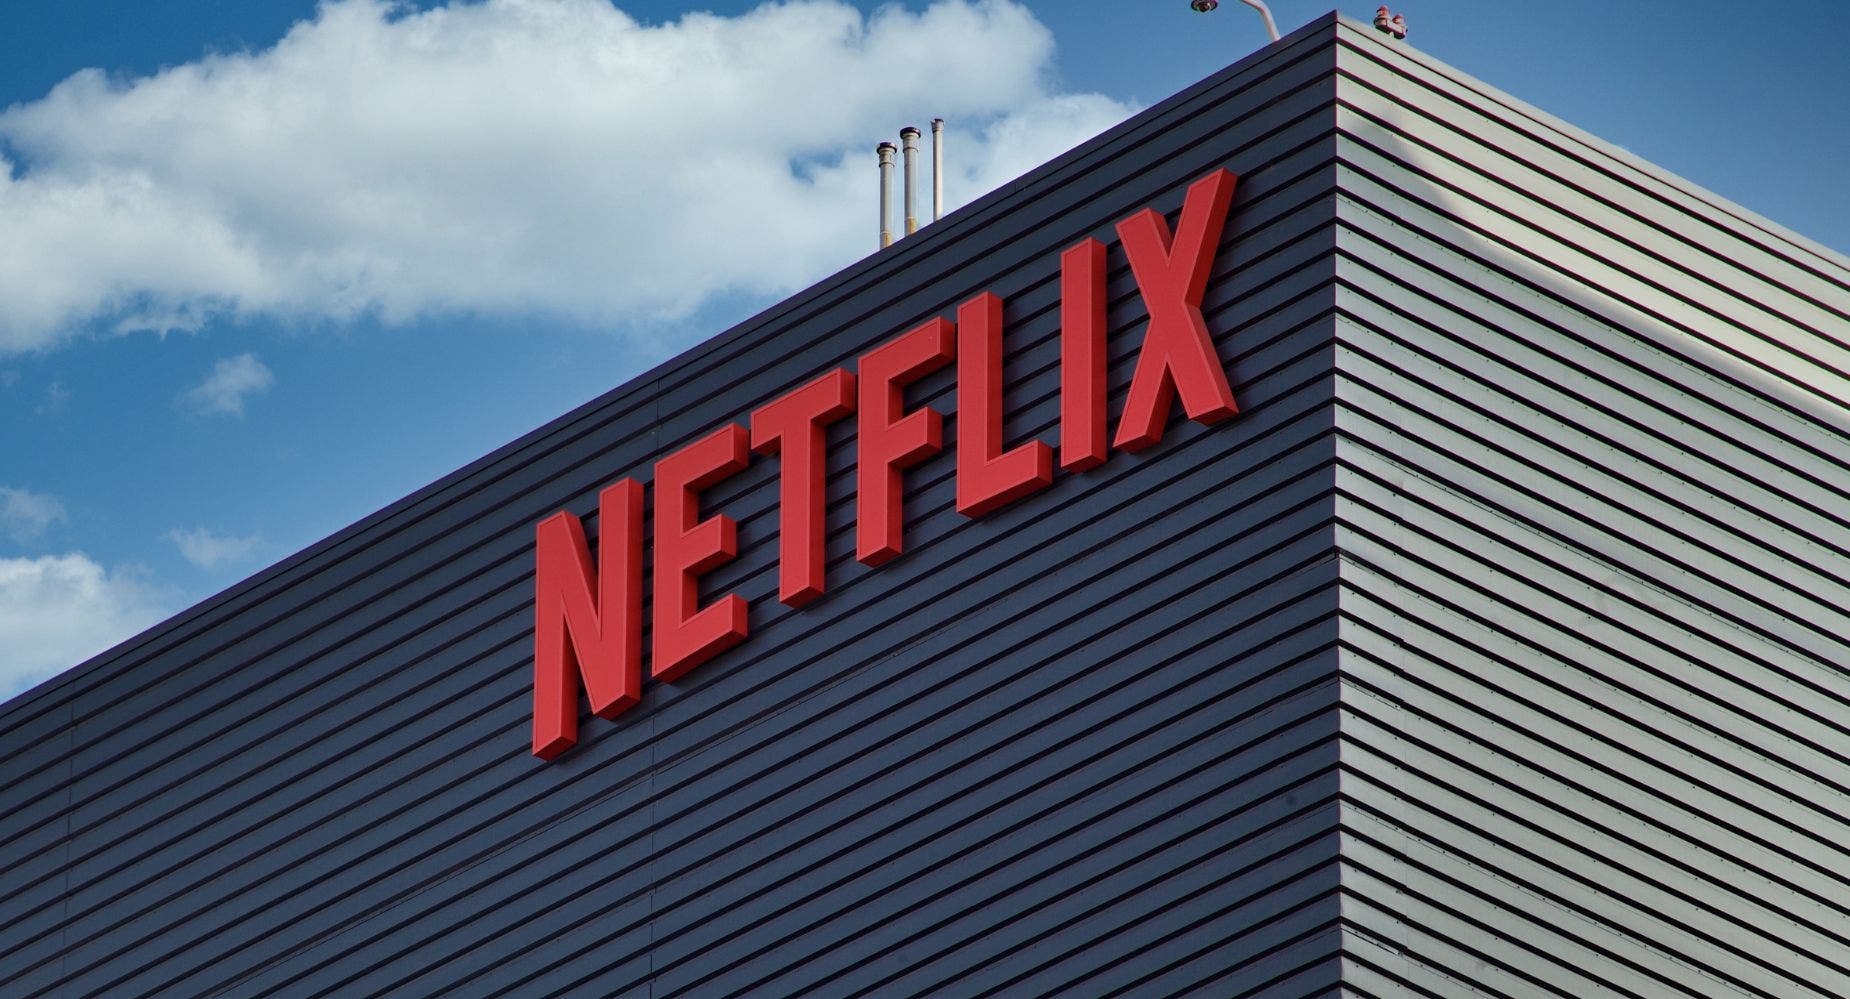 Analyst Raises Netflix EPS Estimate By 50% Ahead Of Q4 Earnings, But Warns 'Valuation Leaves Little Room For Error'